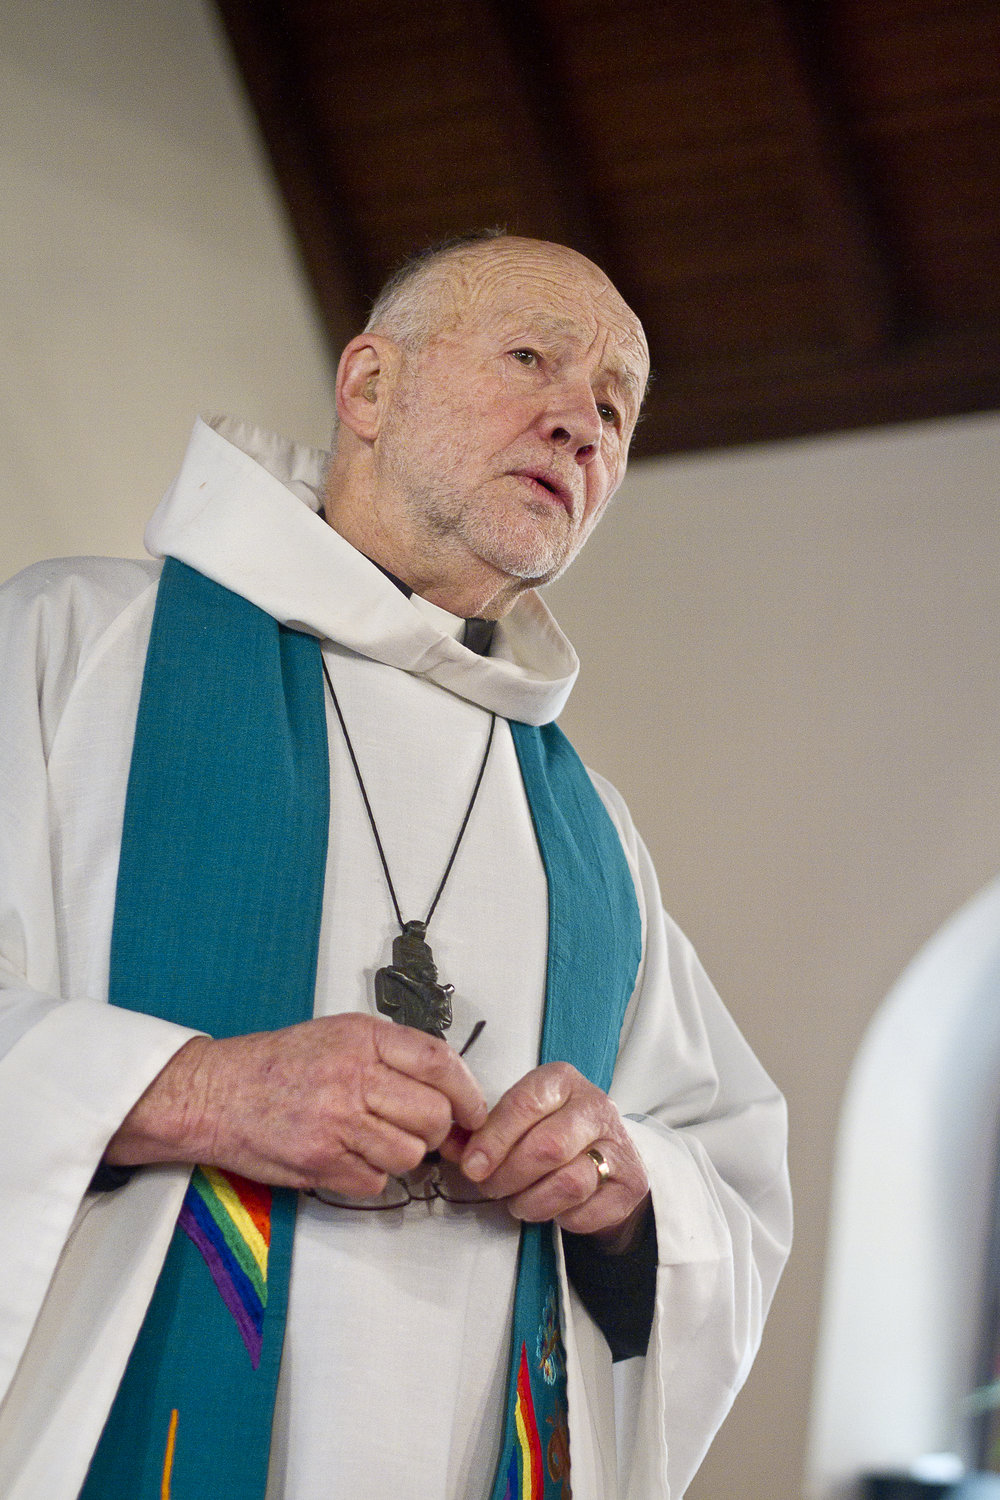  NORTH LAKE, WI — JANUARY 18, 2015: Reverend David Couper delivers the homily during during mass at St. Peter’s Episcopal Church, Sunday, January 18, 2015. 